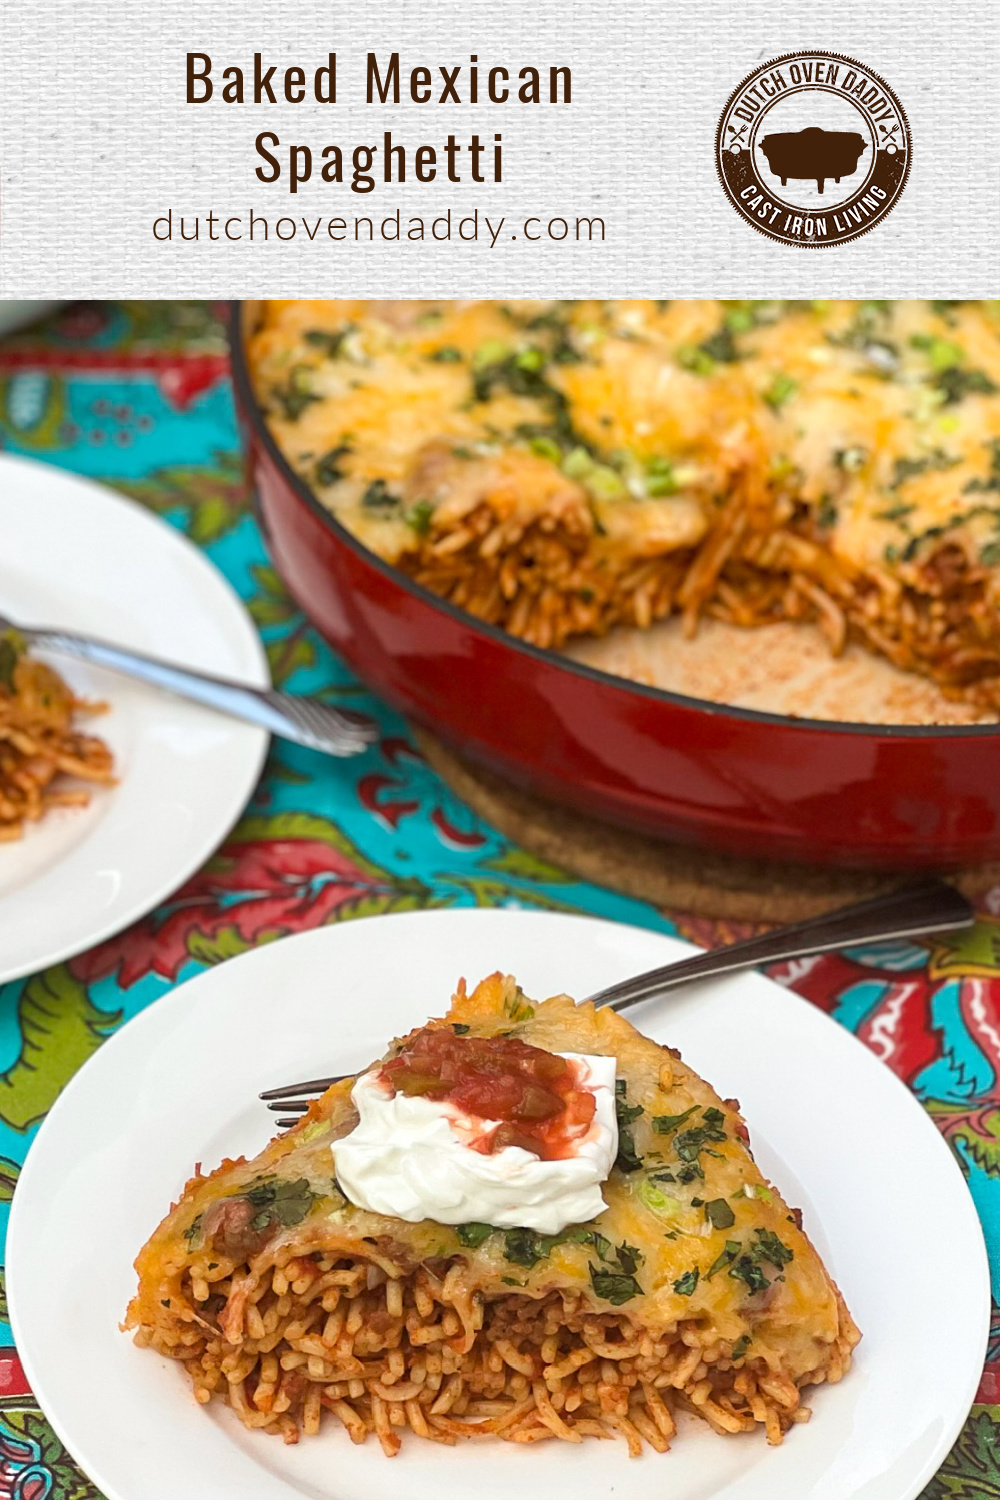 Branded image of Baked Mexican Spaghetti sliced and garnished with sour cream and salsa. 